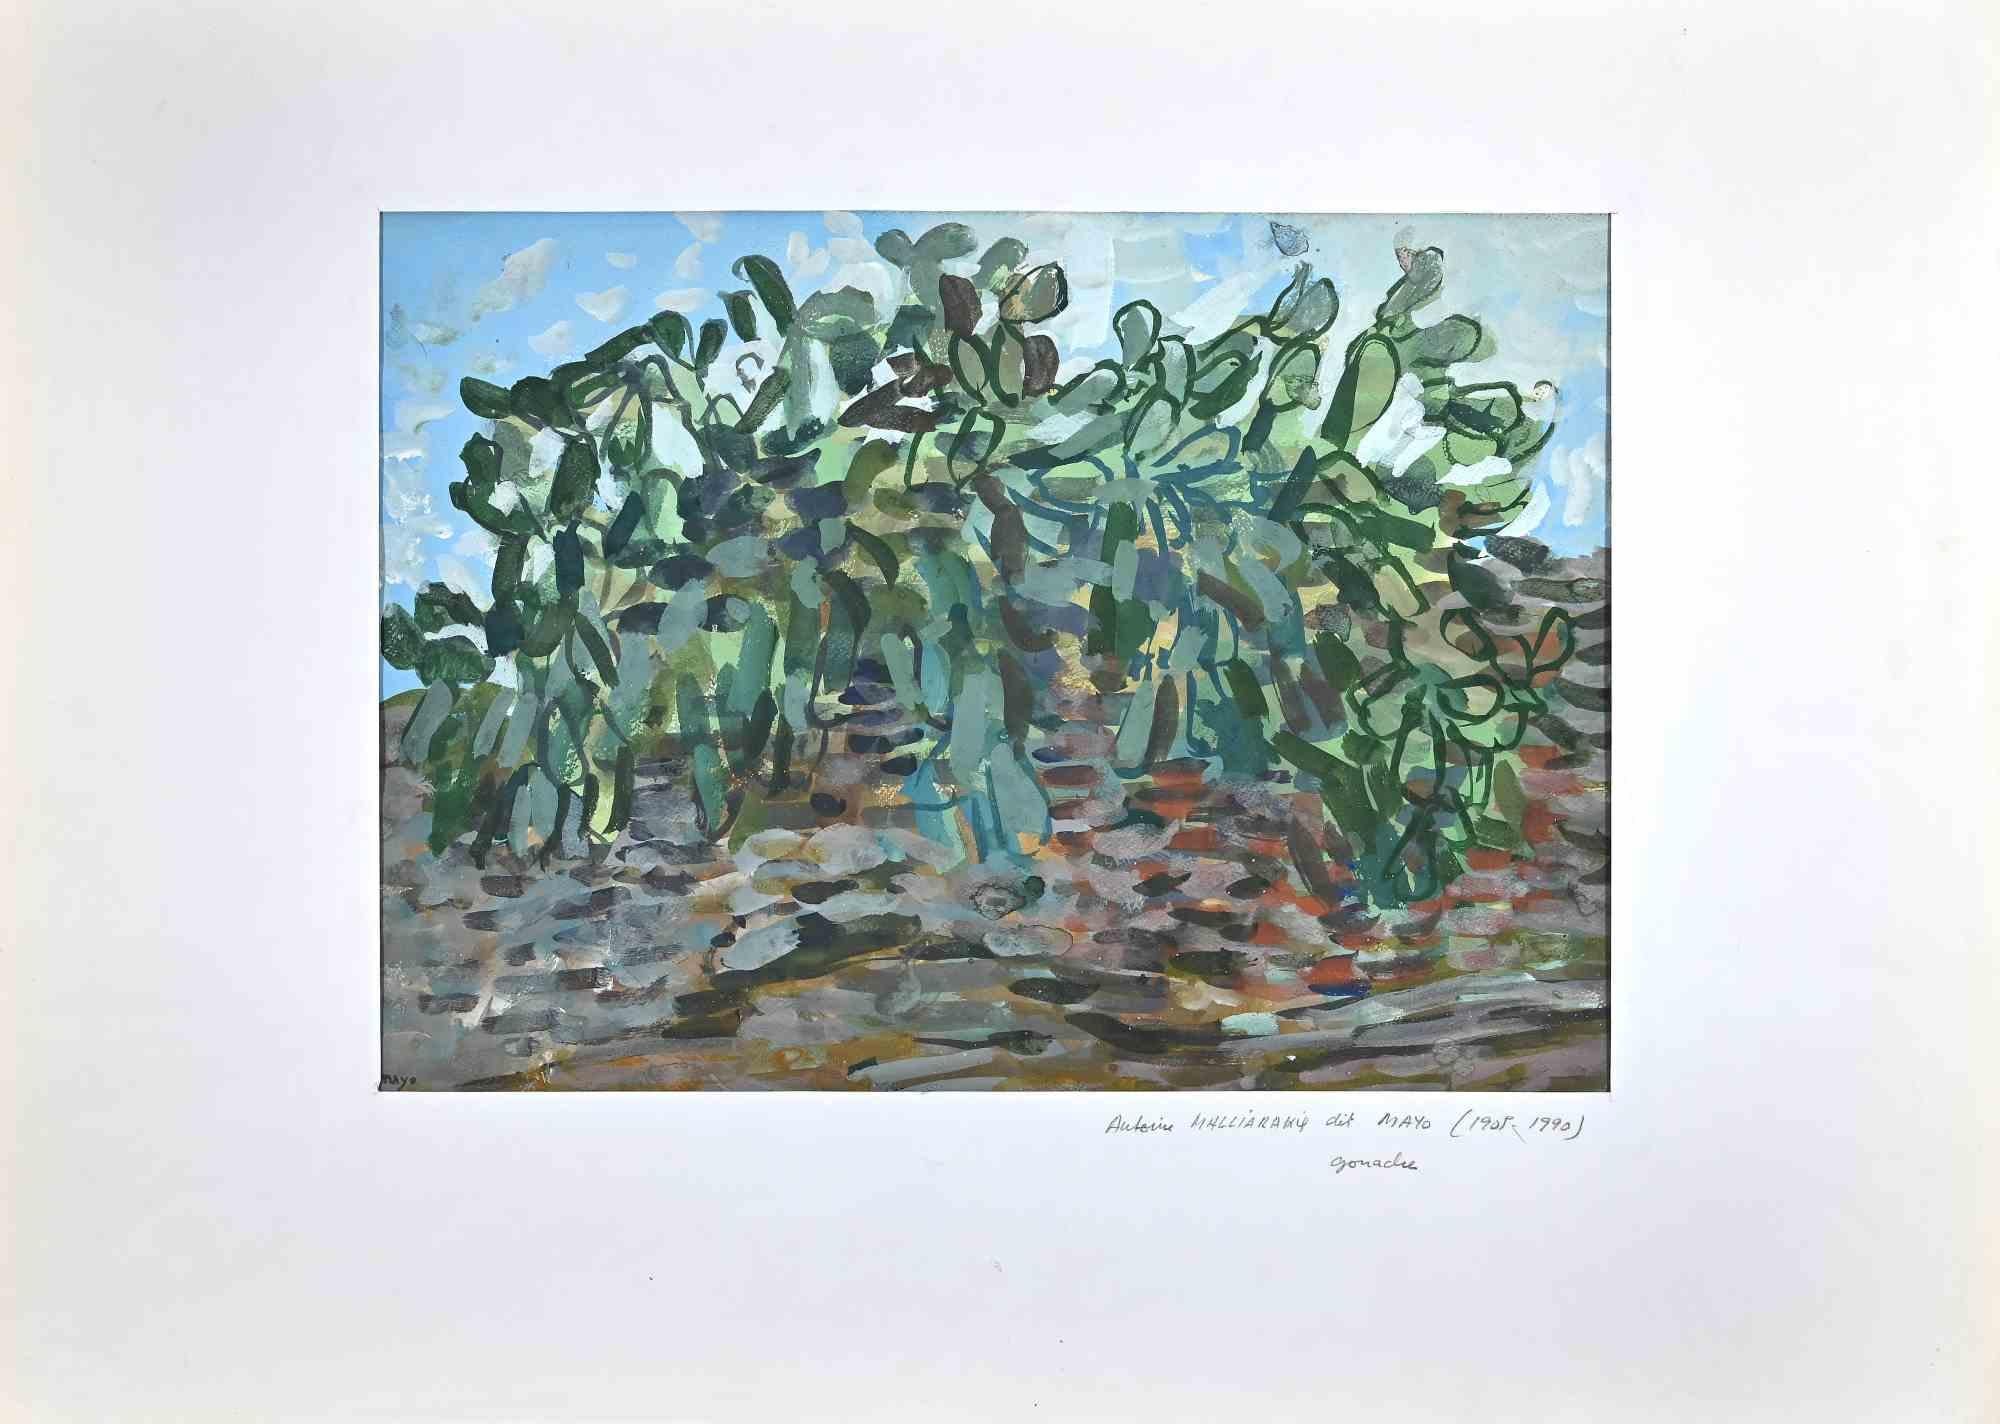 Landscape is an original drawing in Gouache, realized by the artist Antoine Mayo (1905-1990) in the 1950s.

Hand-Signed.

In good condition.

Antoine Mayo  (Port Said, Egypt 1905 - Seine Port1990). Greek painter naturalized French citizen, active